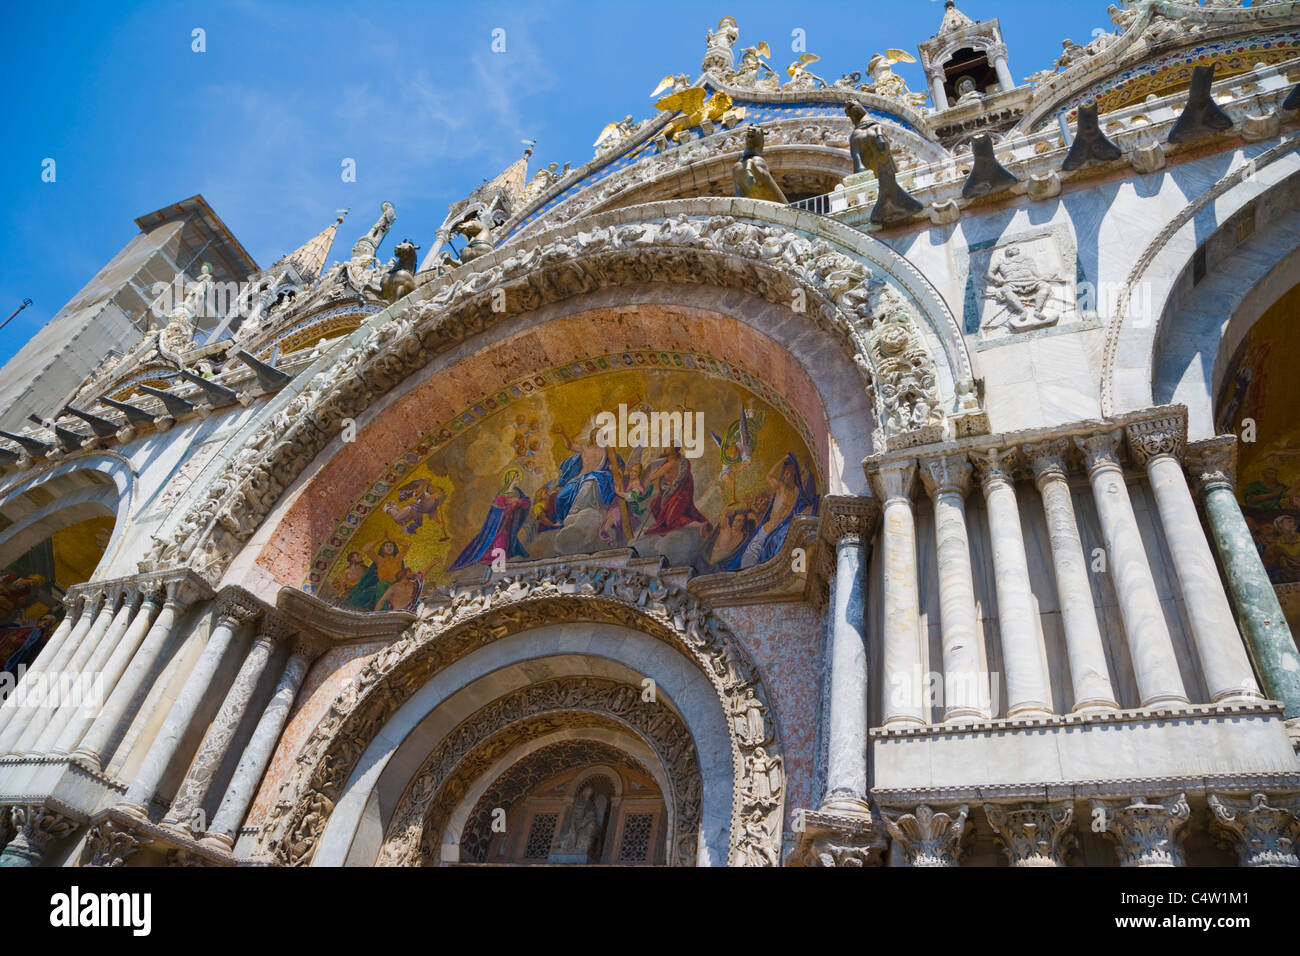 Principal portal with mosaic Christ in Glory and the Last Judgement, the Basilica of San Marco, Piazza San Marco,Venice, Italy Stock Photo